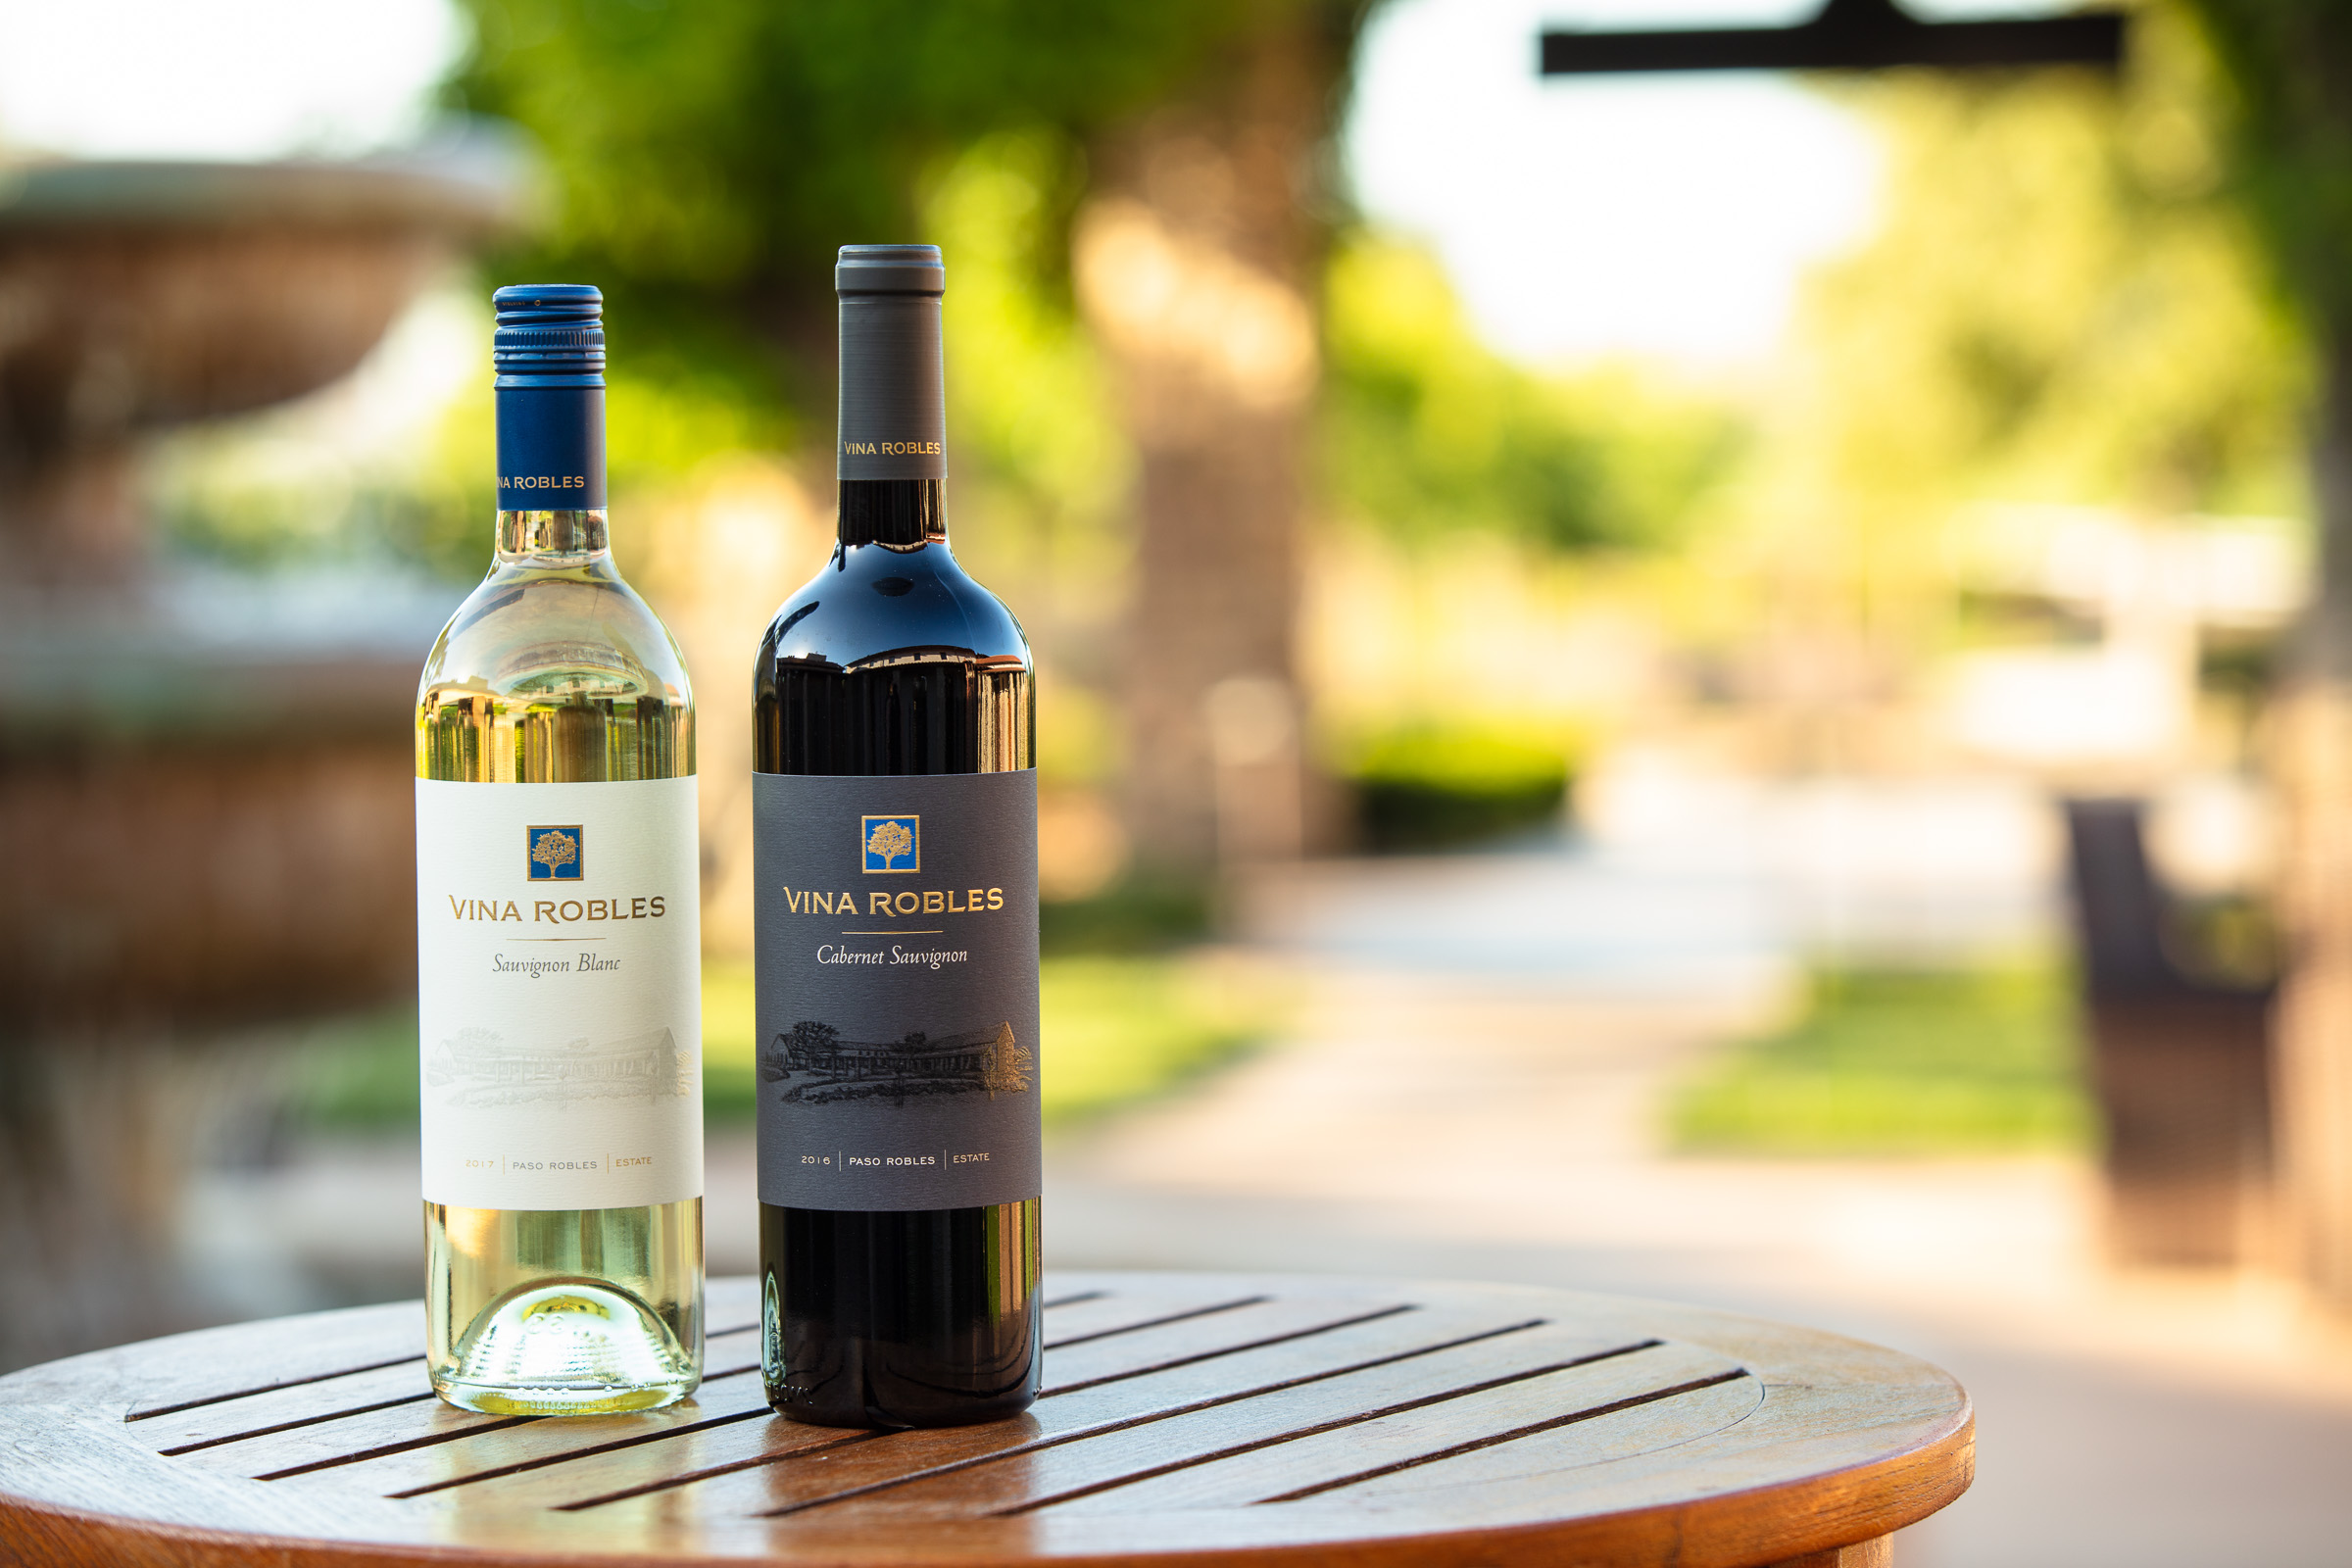 California Wine Month at Vina Robles